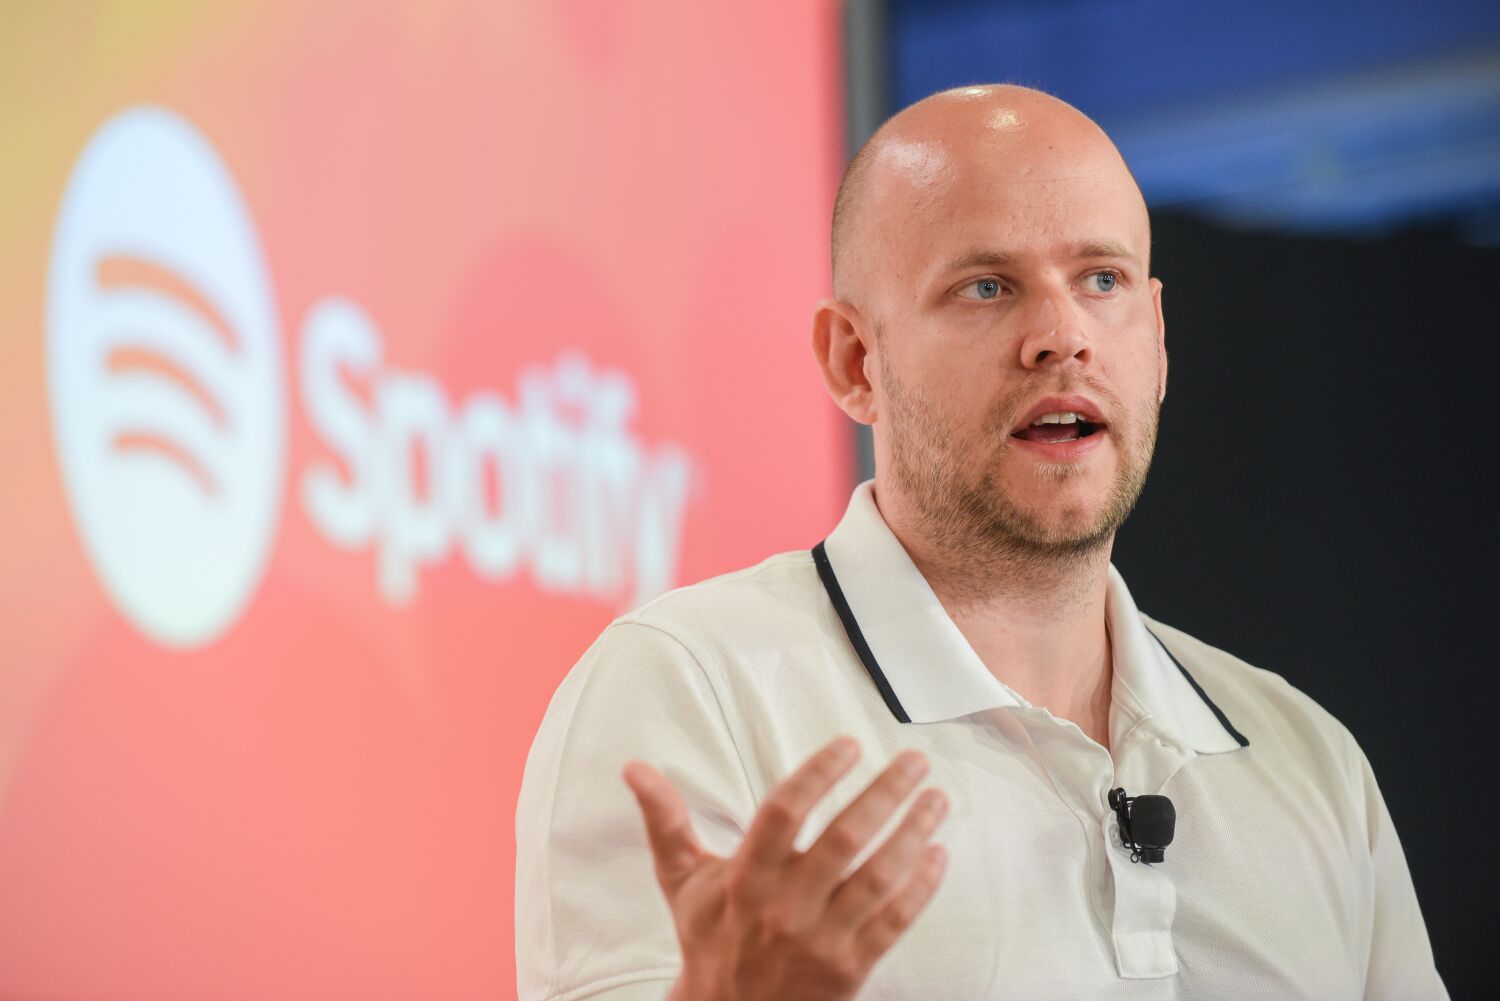 Spotify charts podcasting future after controversies, challenges and shakeups